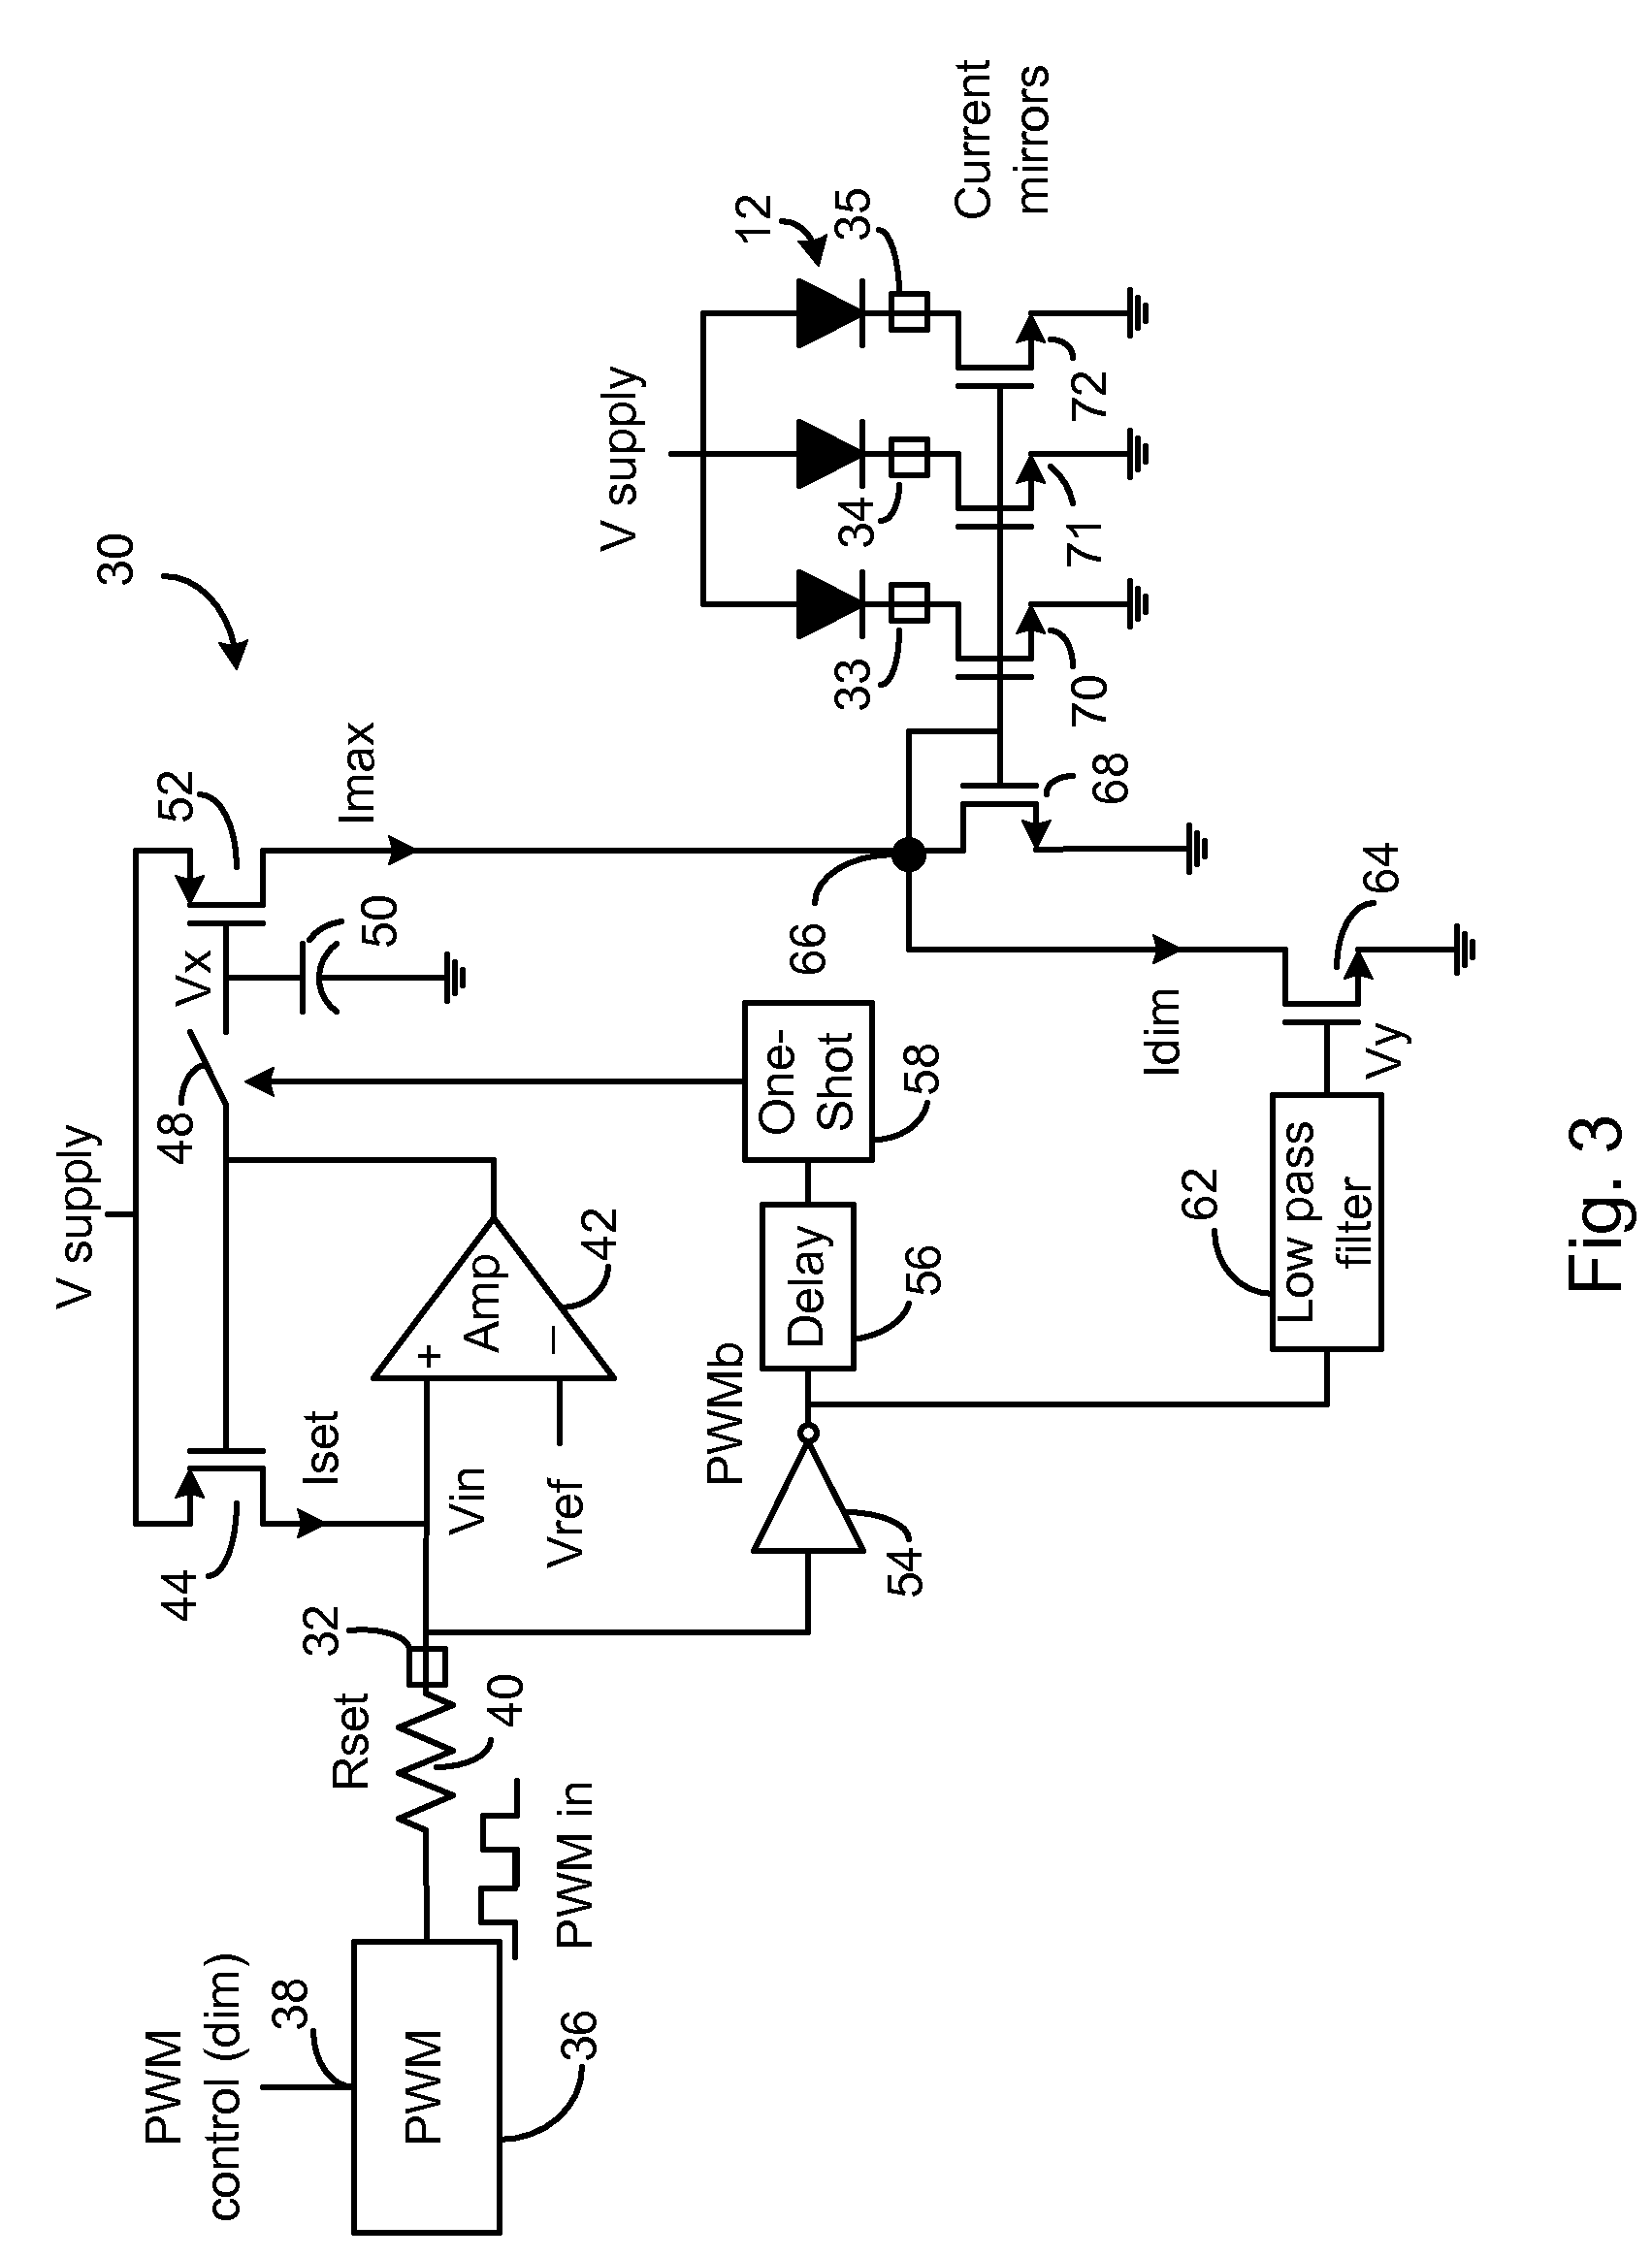 LED Controller IC Using Only One Pin to Dim and Set a Maximum LED Current